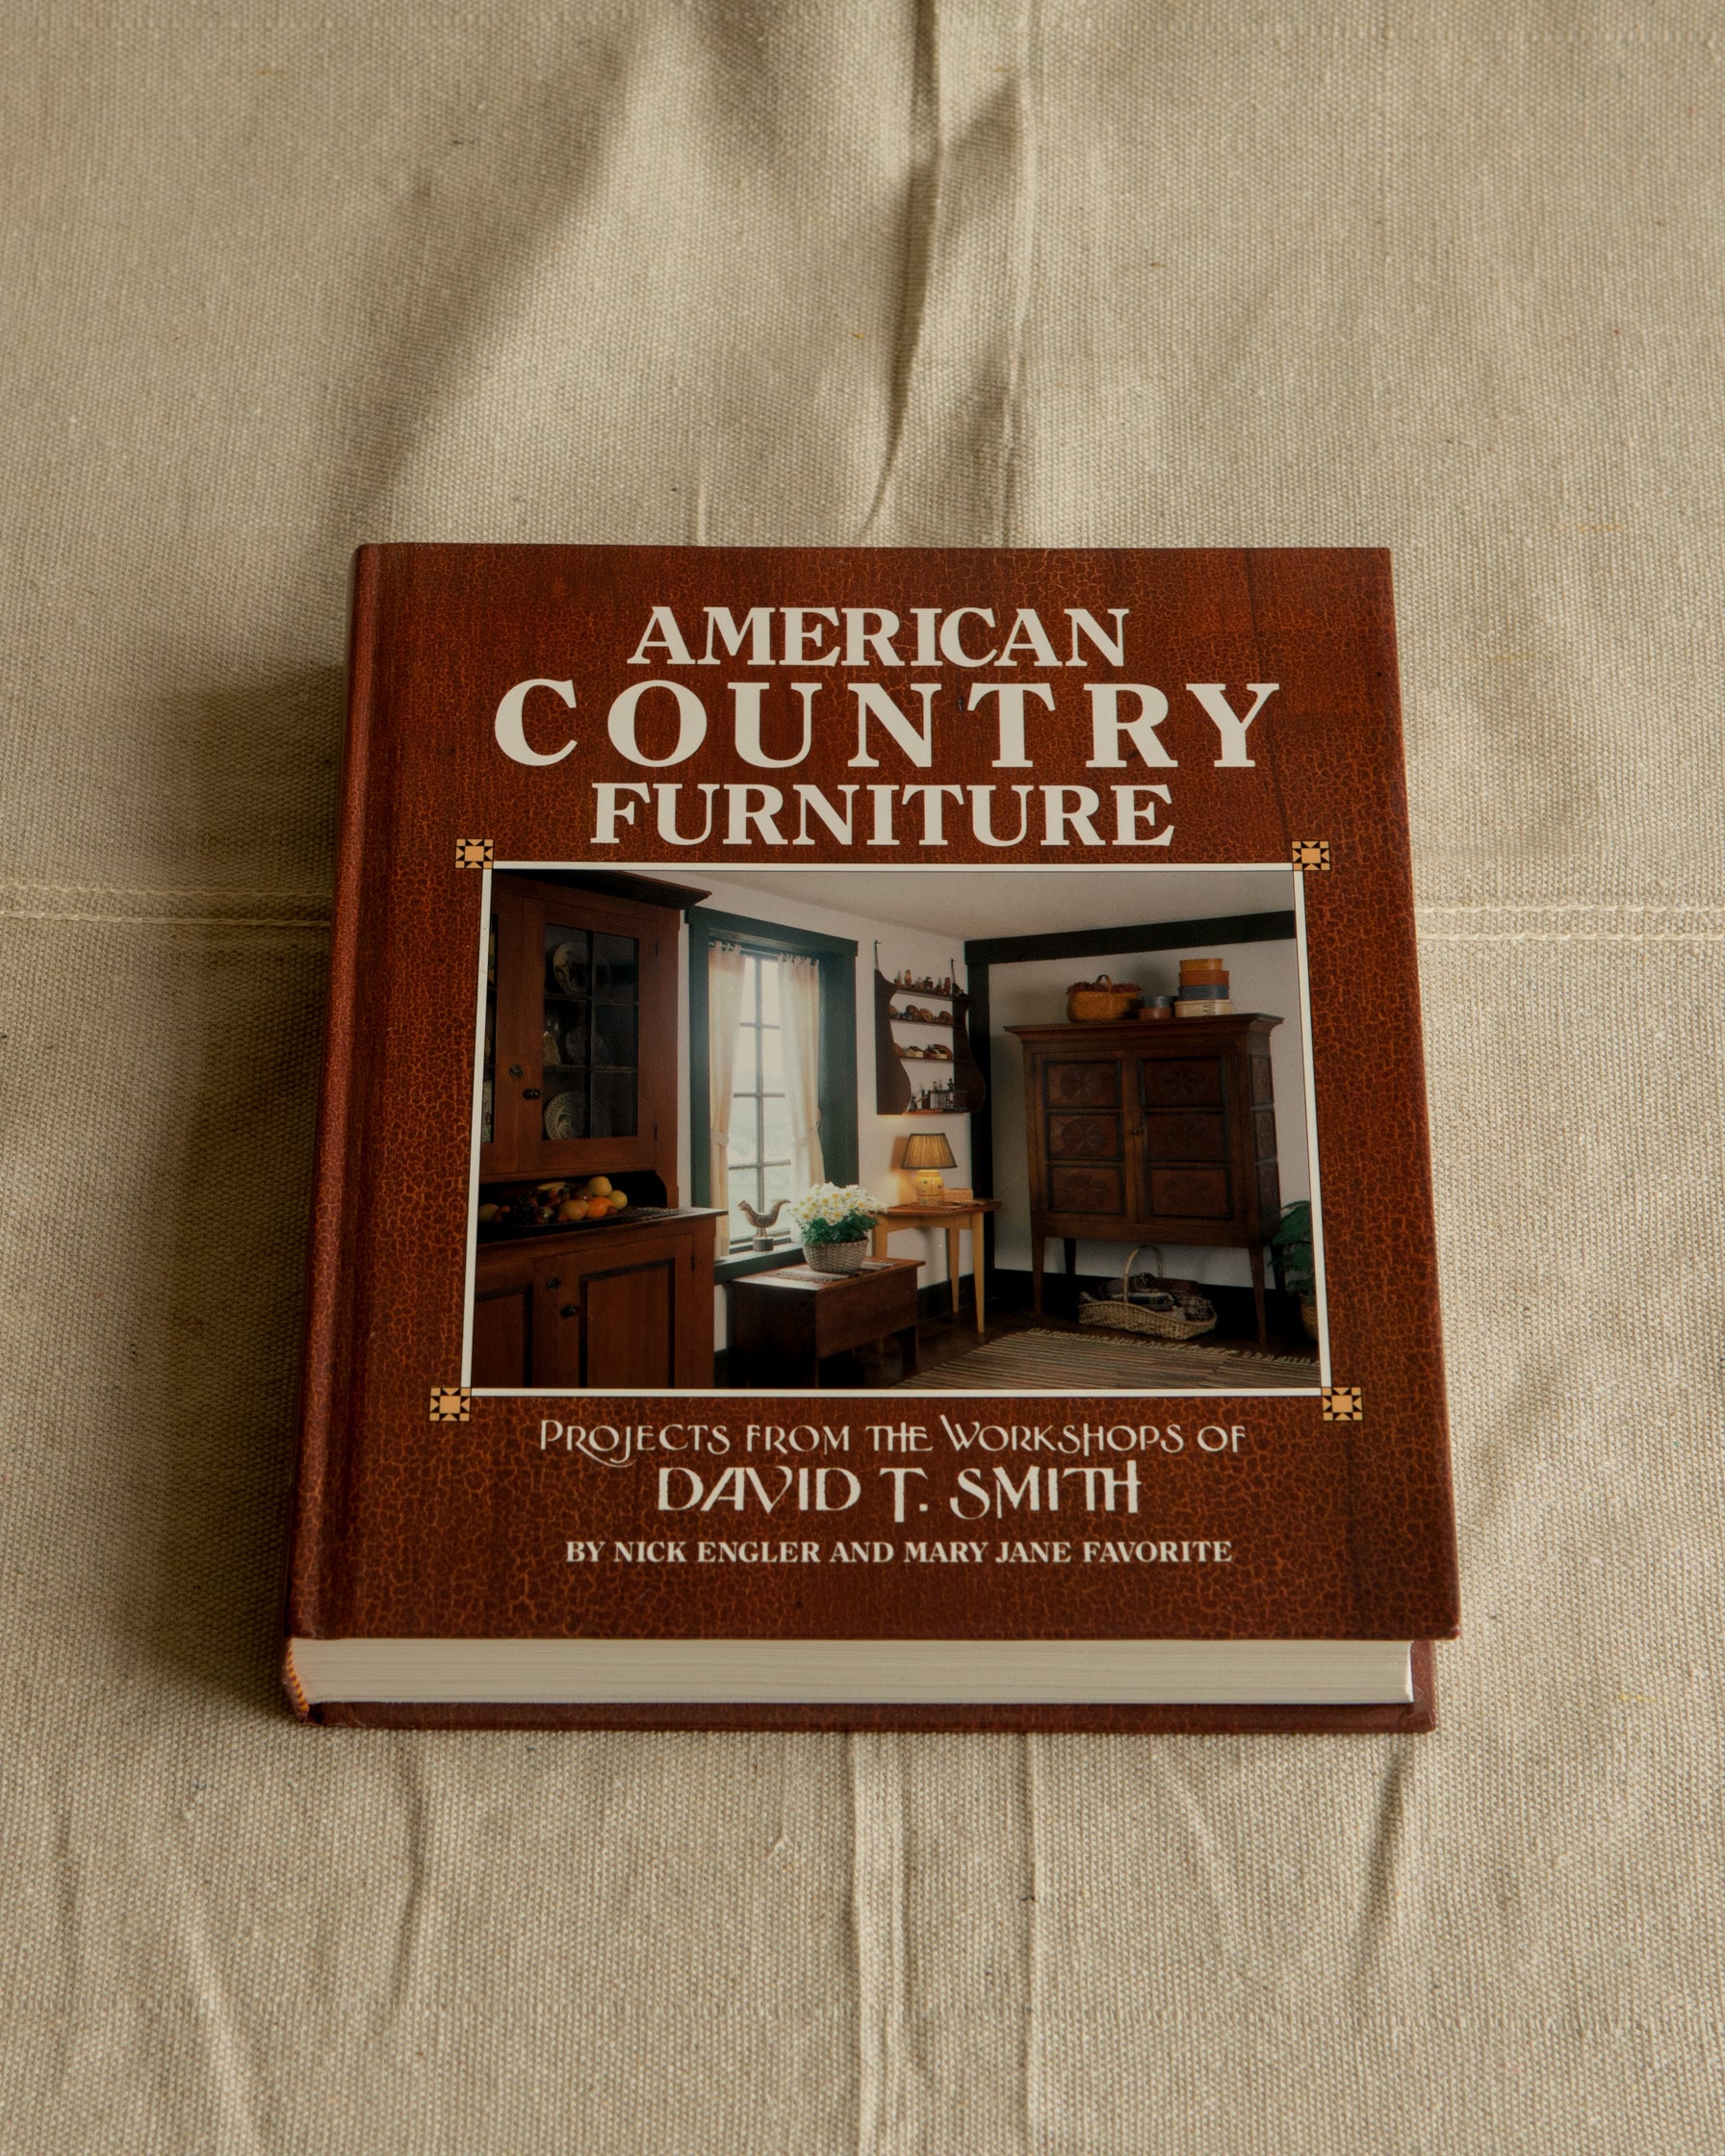 American Country Furniture